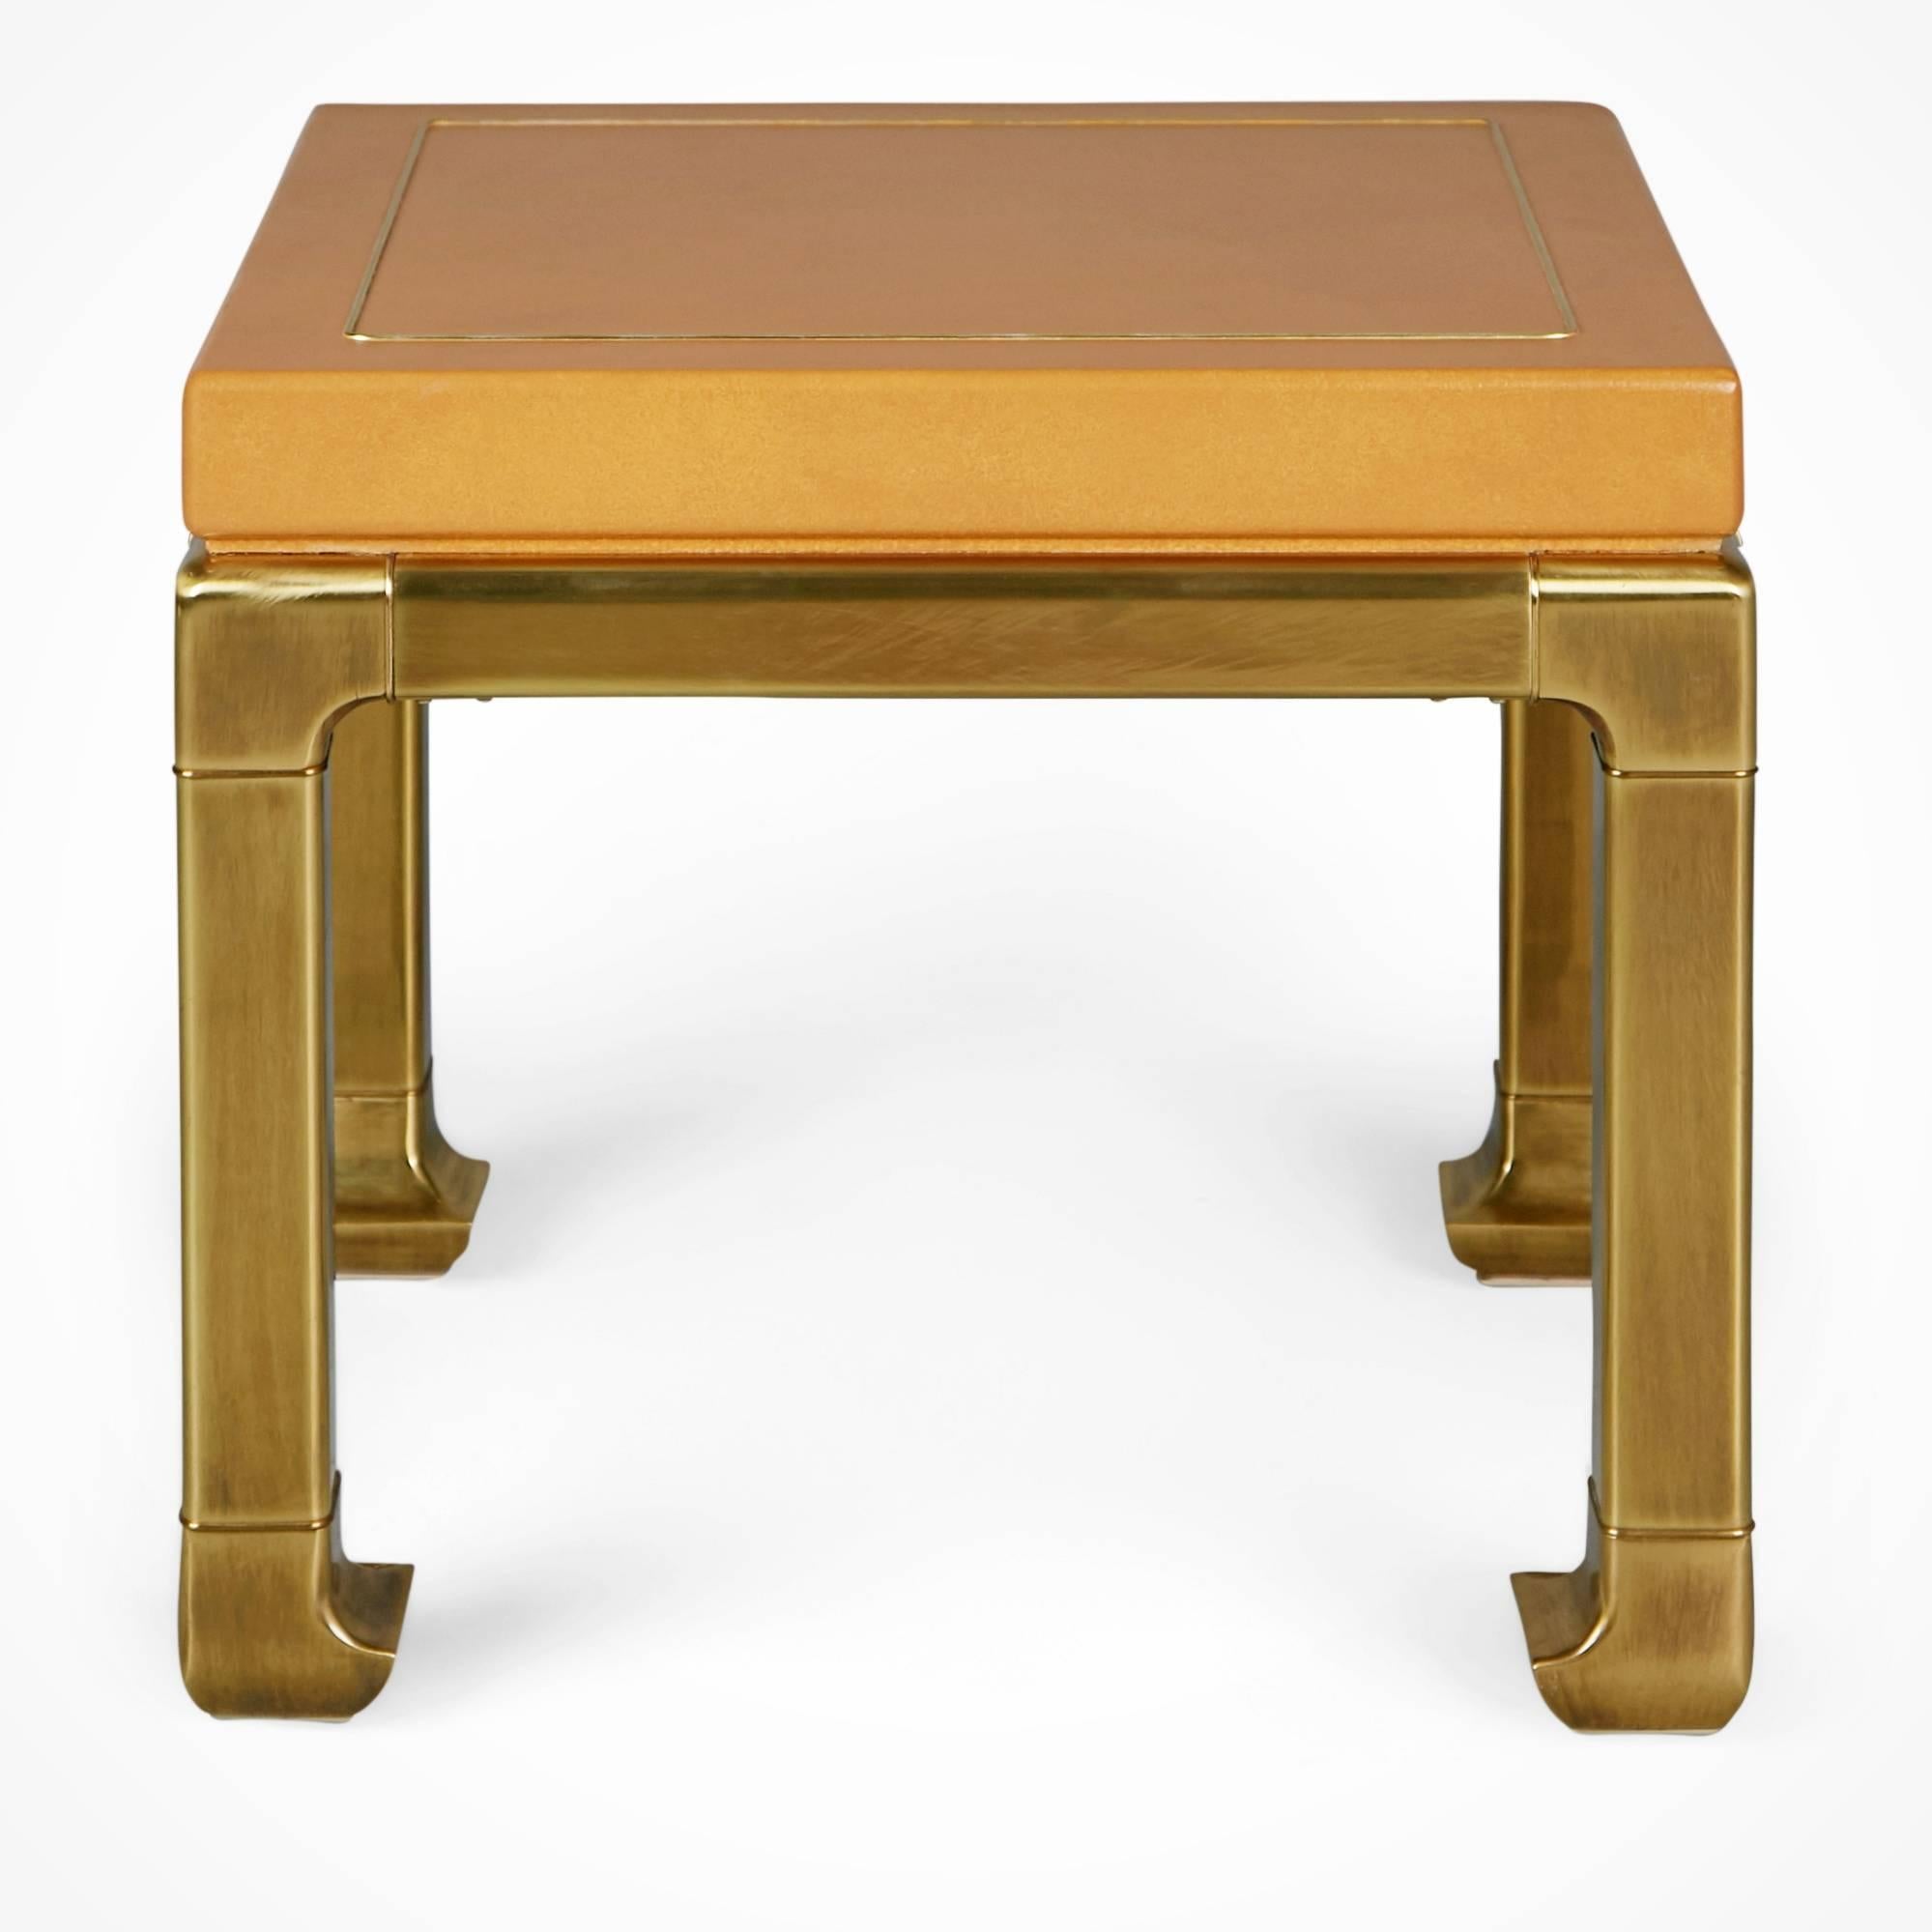 Mid-Century Modern Mastercraft Faux Ostrich Skin and Brass Coffee and Side Table Set, circa 1970